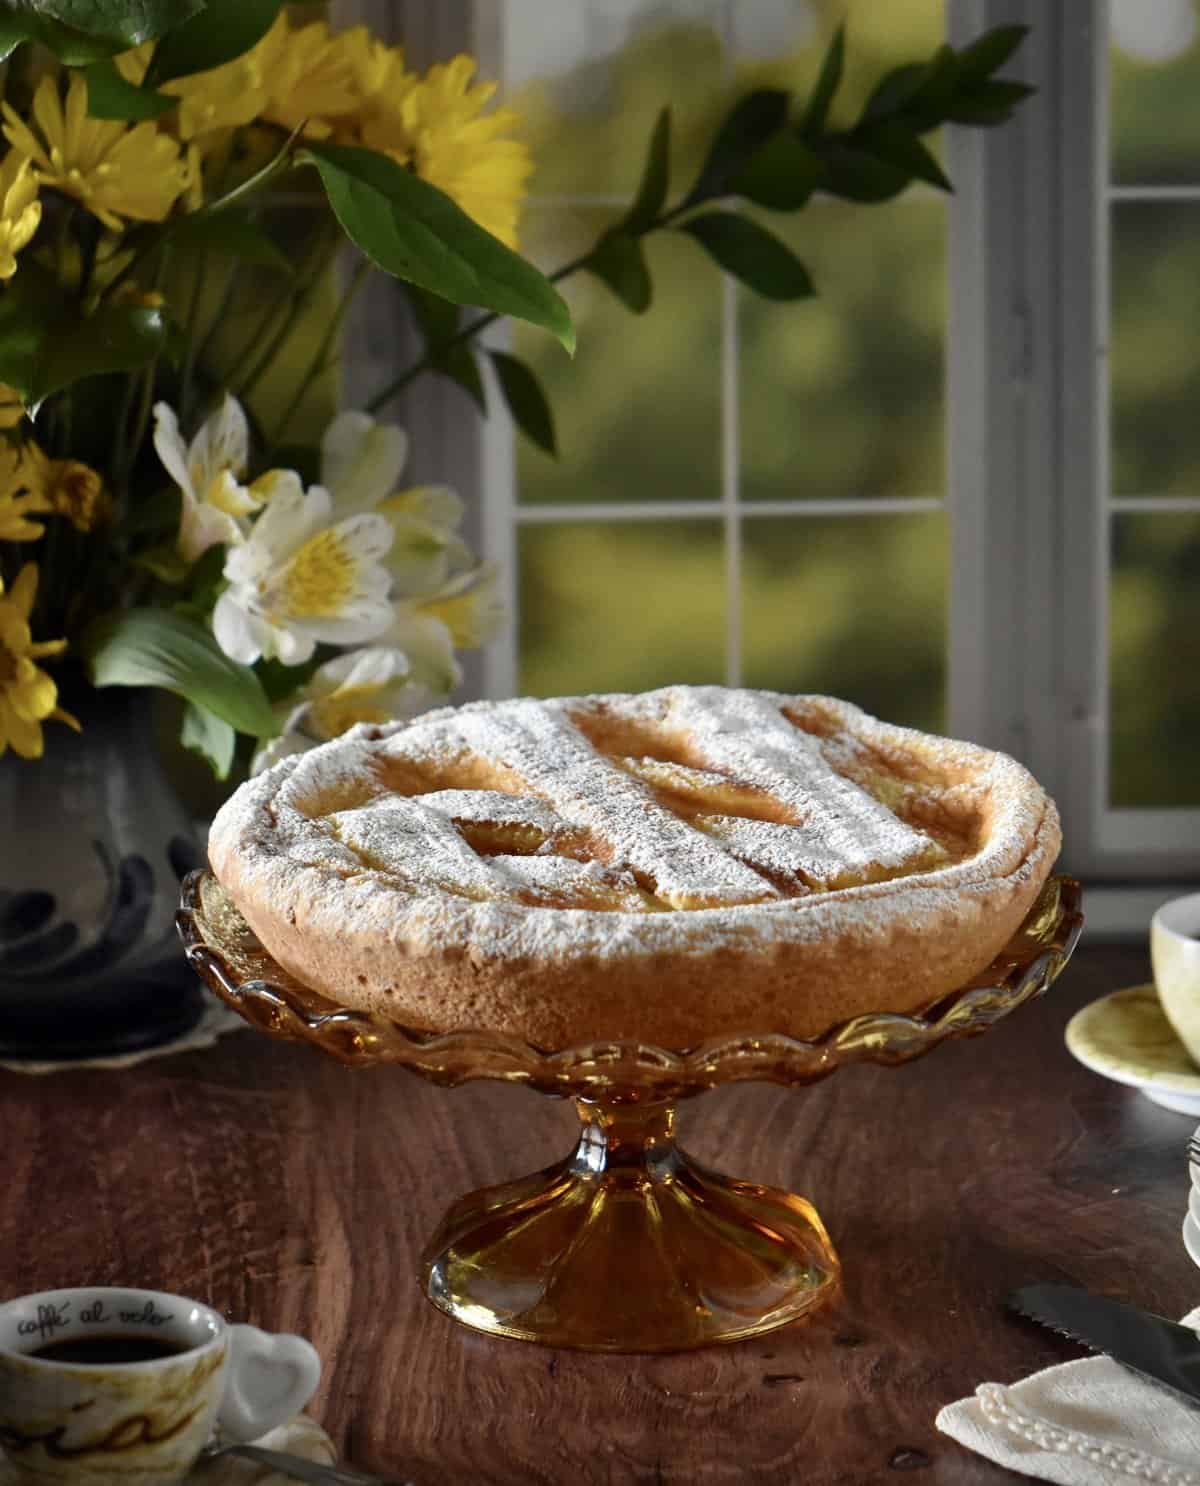 Pasteria Napoletana on an amber colored cake stand set before a window,